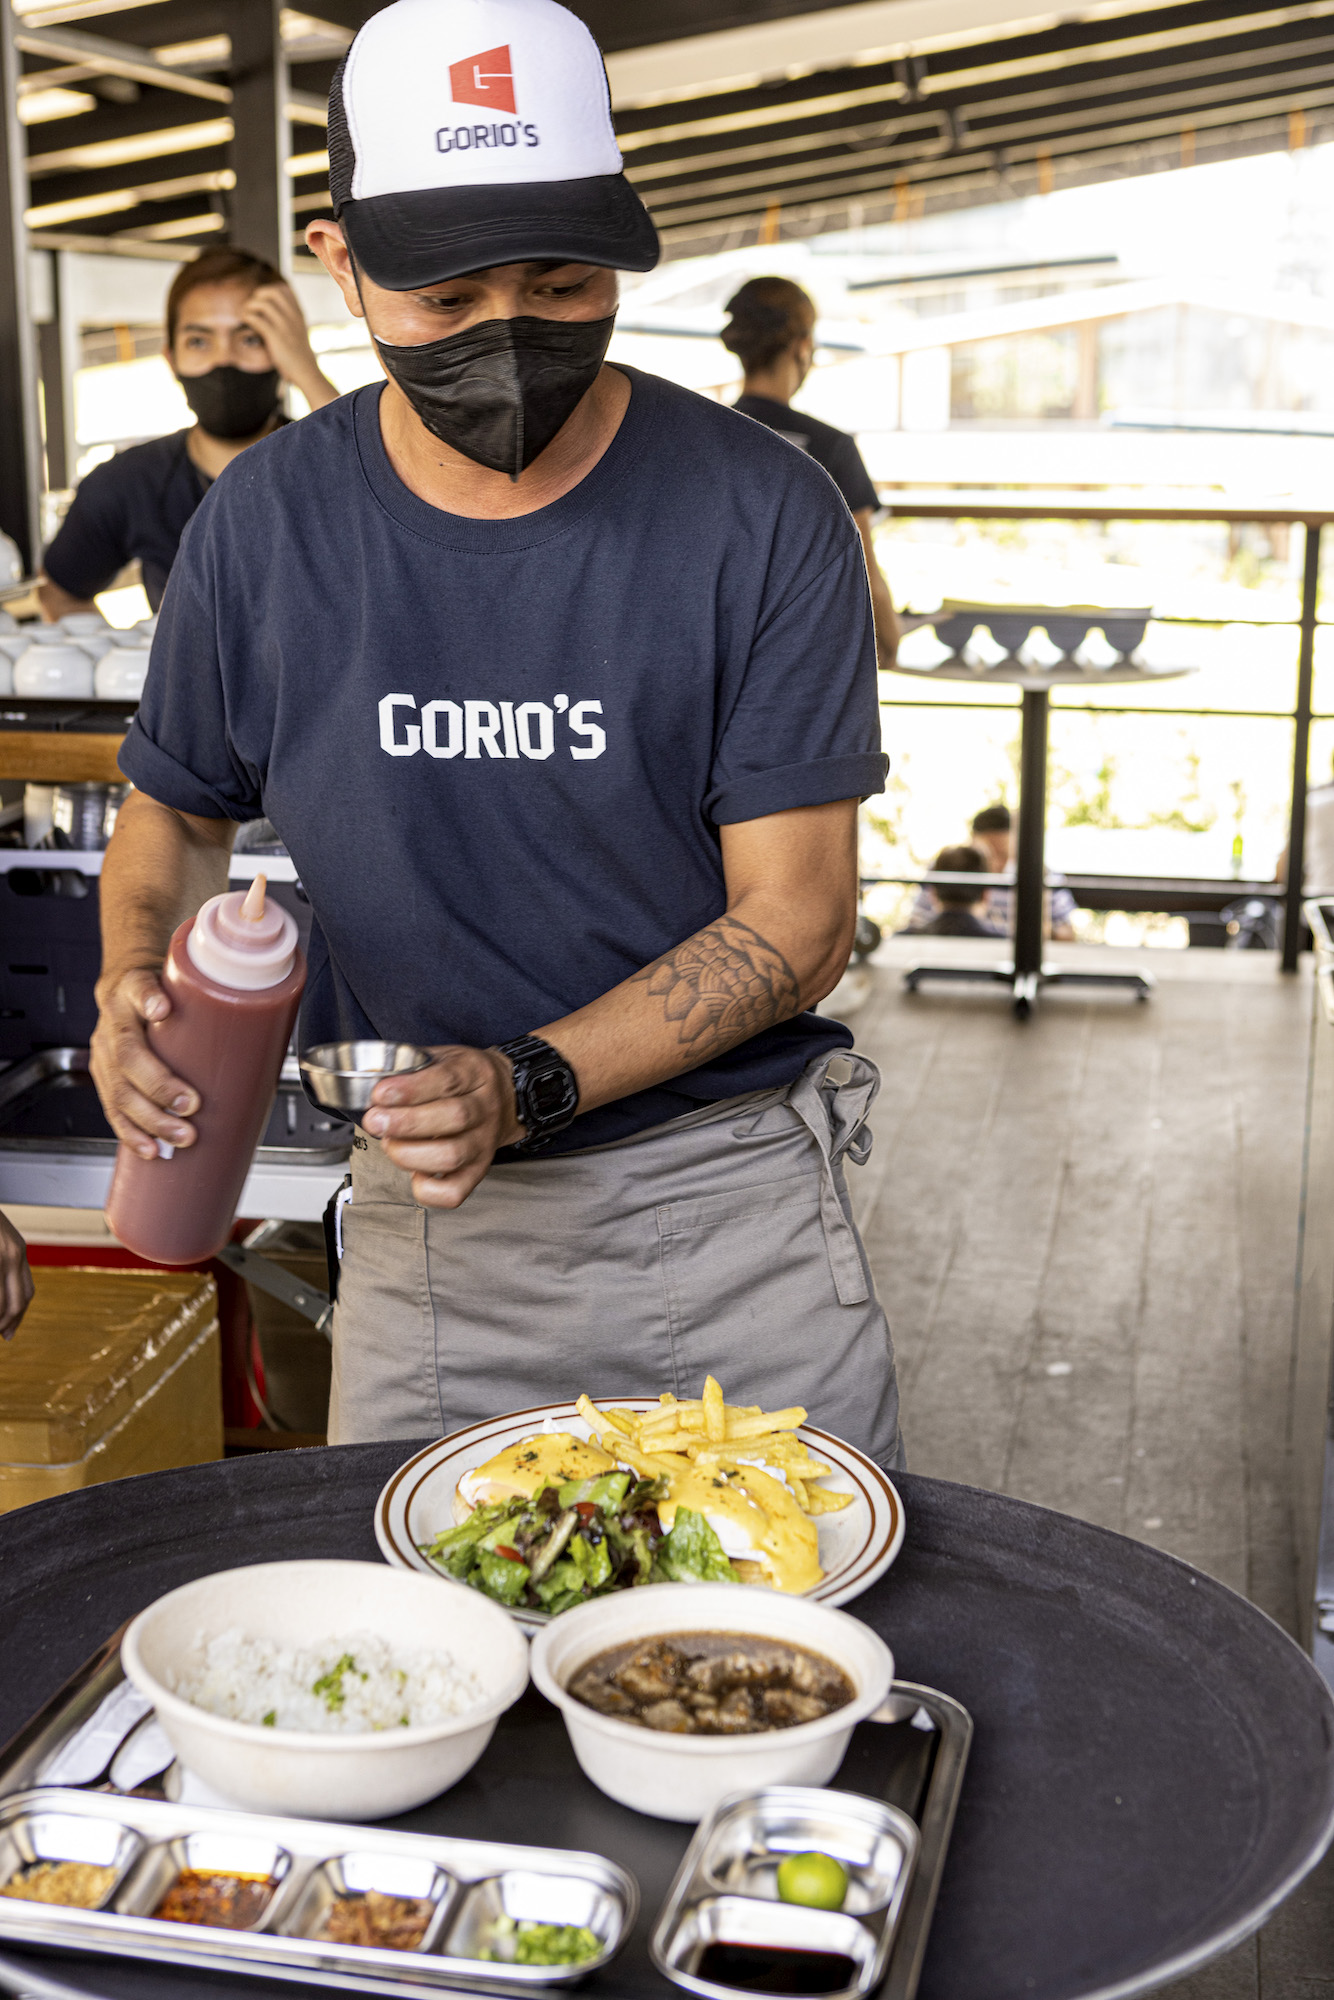 Each and every staff at Gorio's has tasted the items on the menu